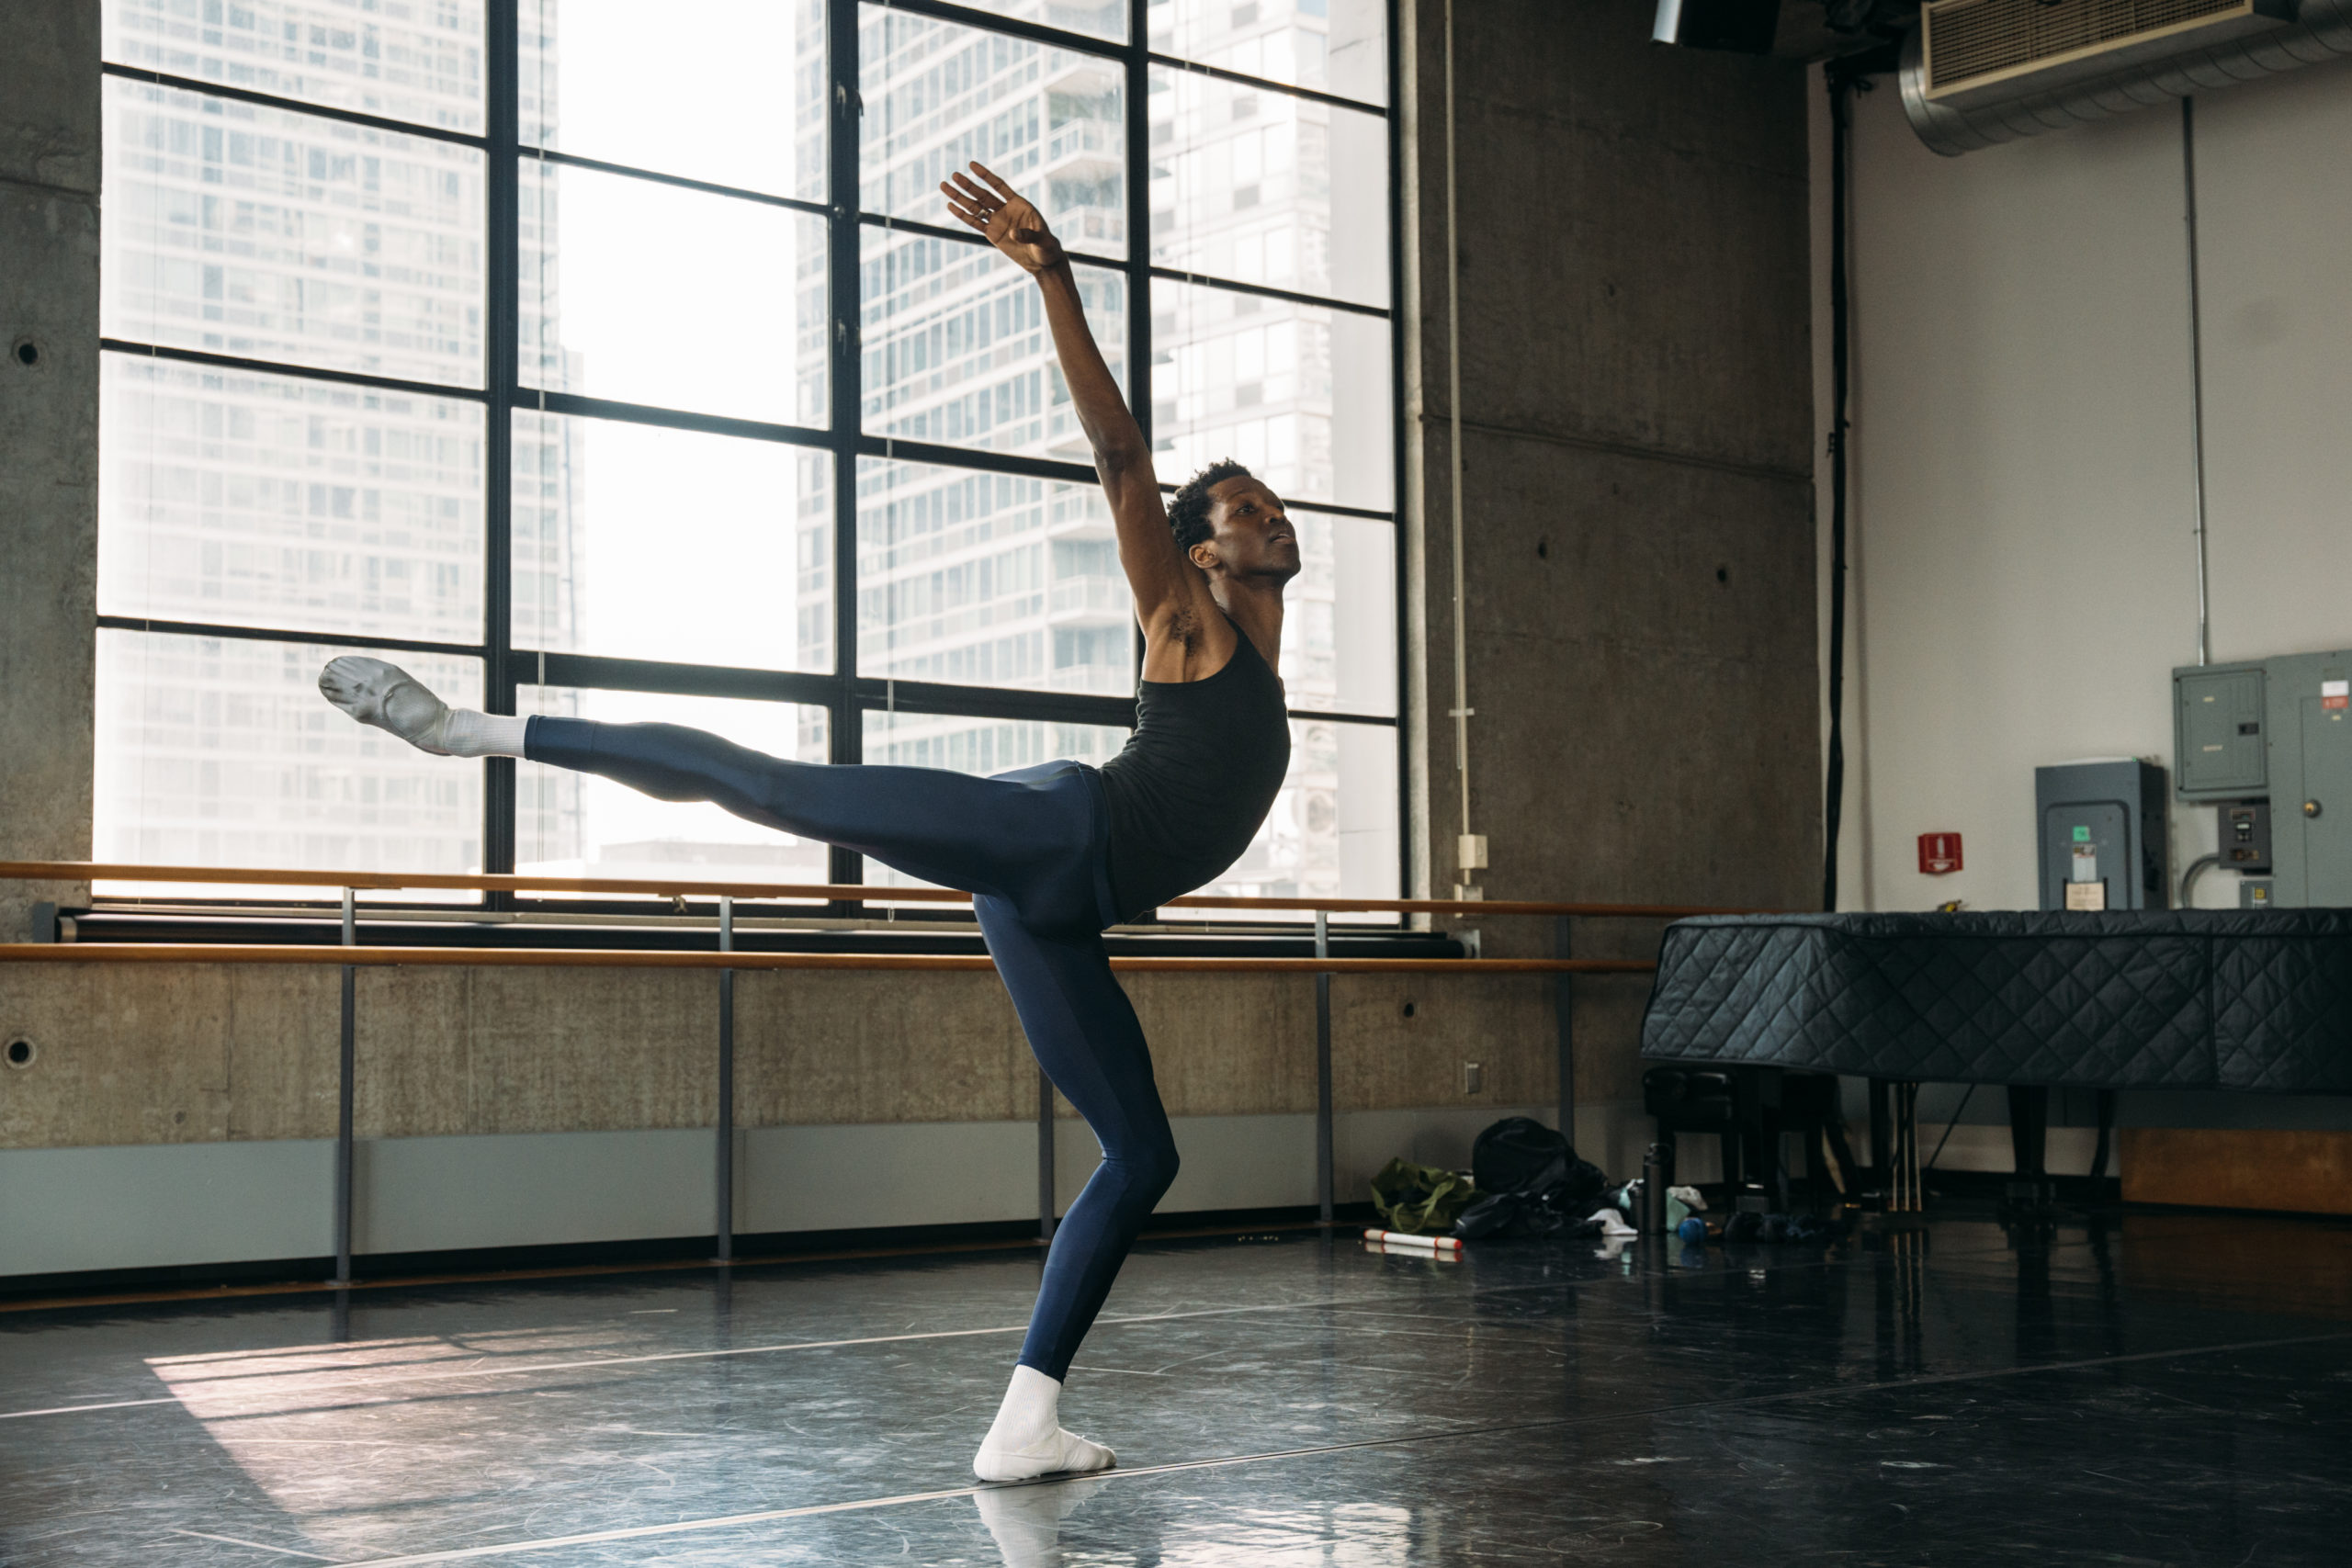 In a dance studio with large, industrial windows, Calvin Royal III performs an arabesque allongé with his right leg and arm raised. He wears blue tights, a dark tank top and white socks and ballet slippers, and looks out towards the front of the room.